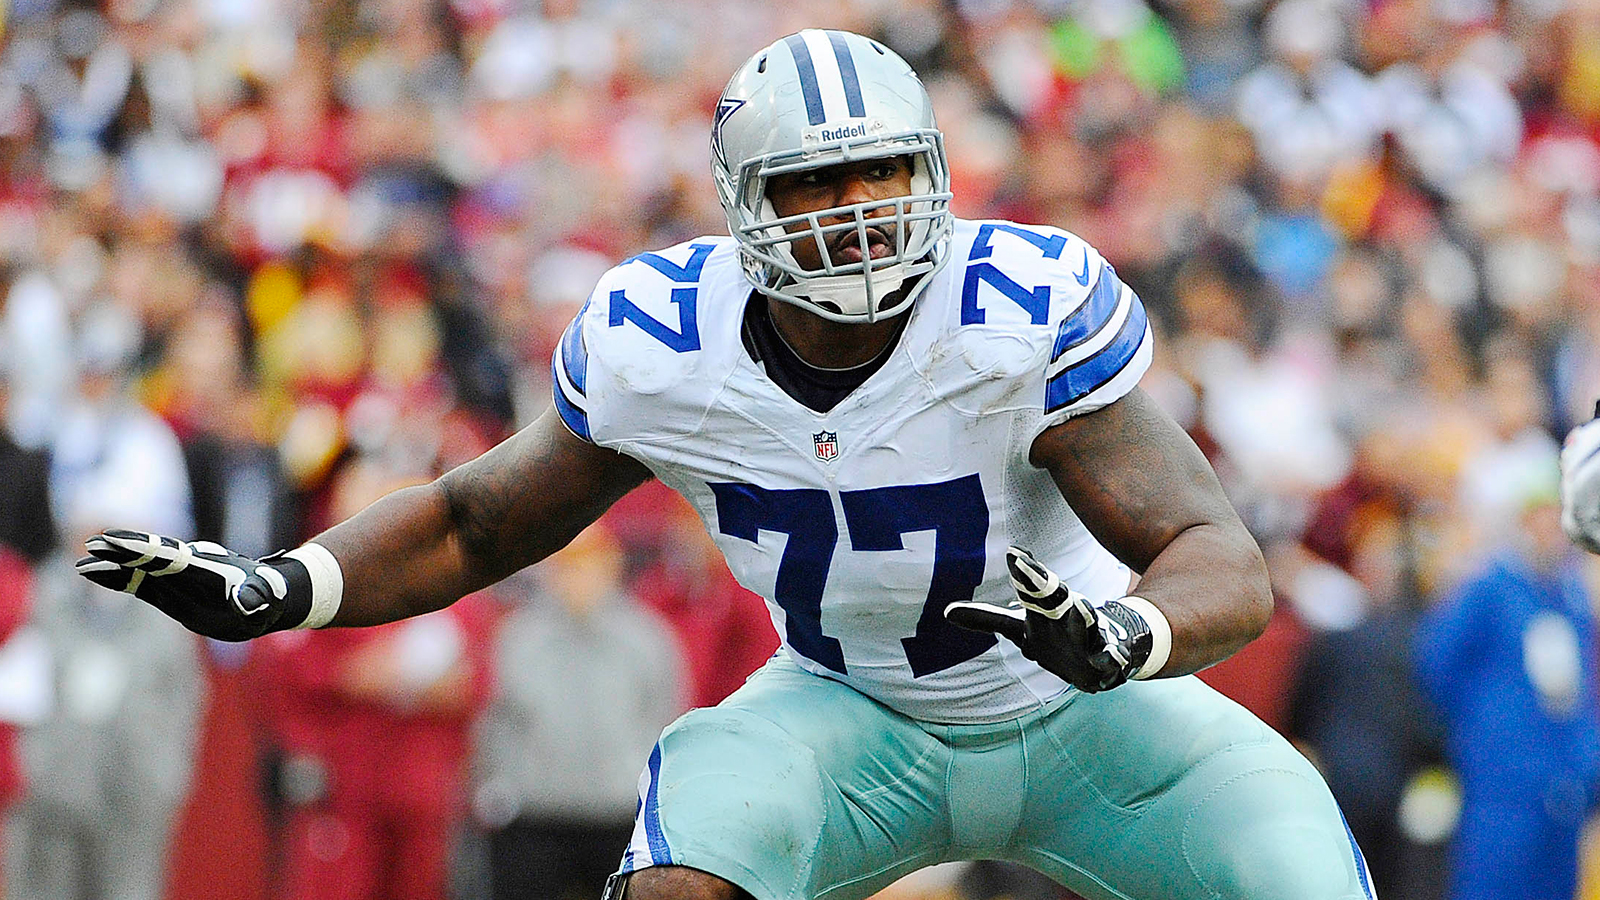 Courtesy of NFL.com: Tyron Smith has been awesome in protection of Tony Romo's blindside. 